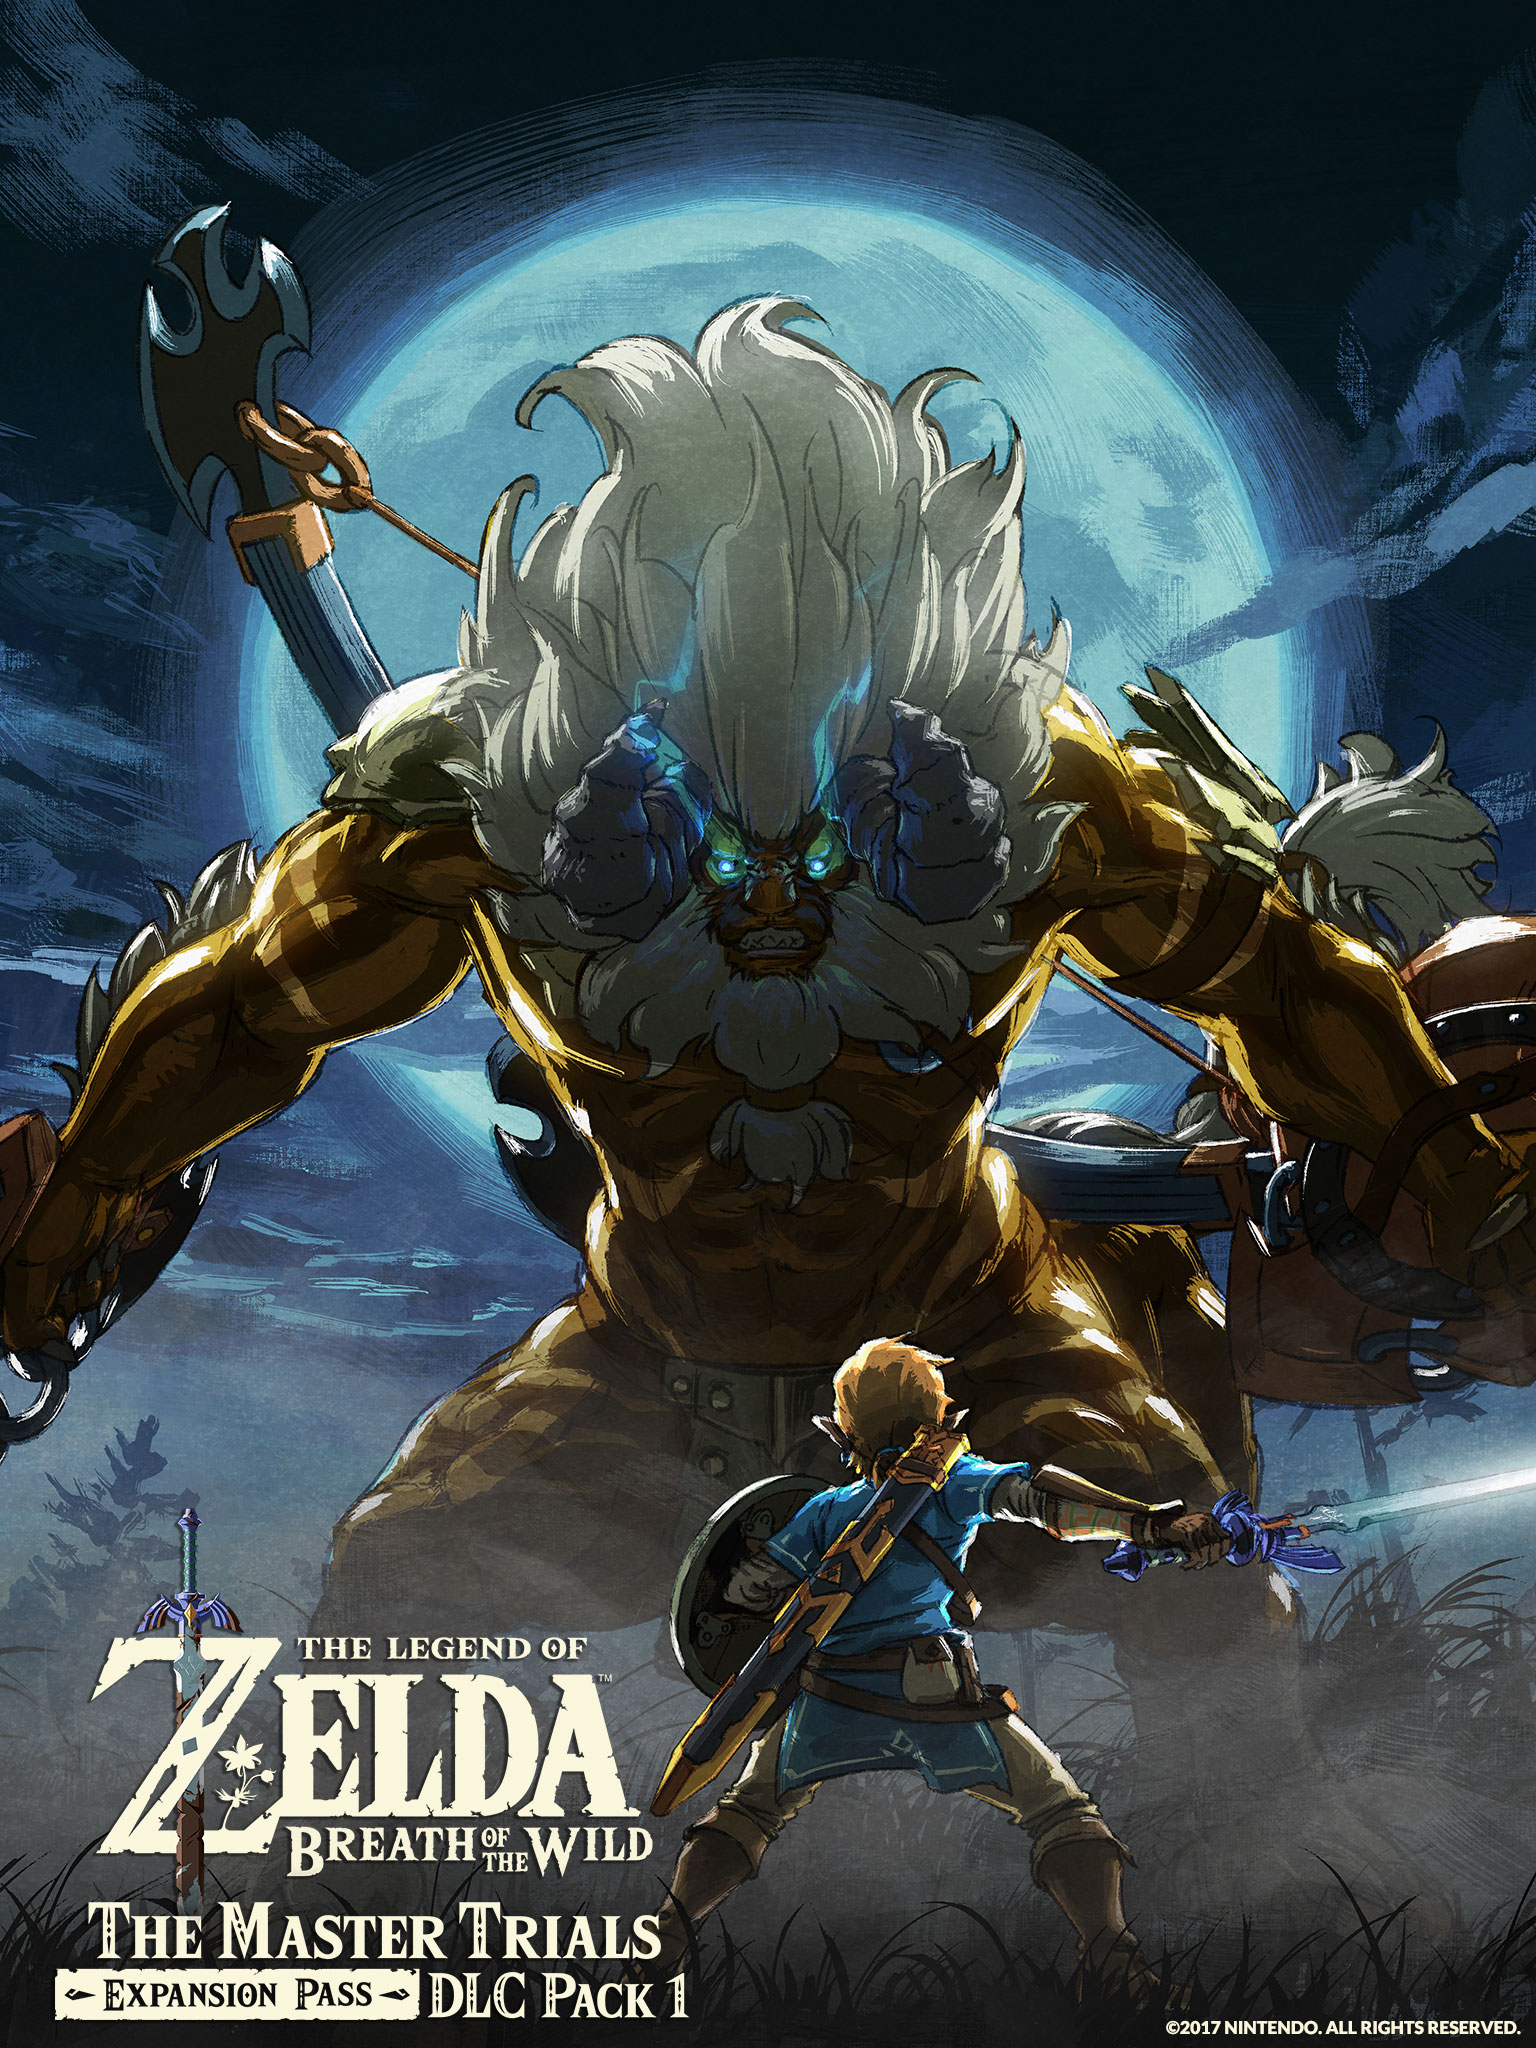 The Legend of Zelda Breath of the Wild for the Nintendo Switch